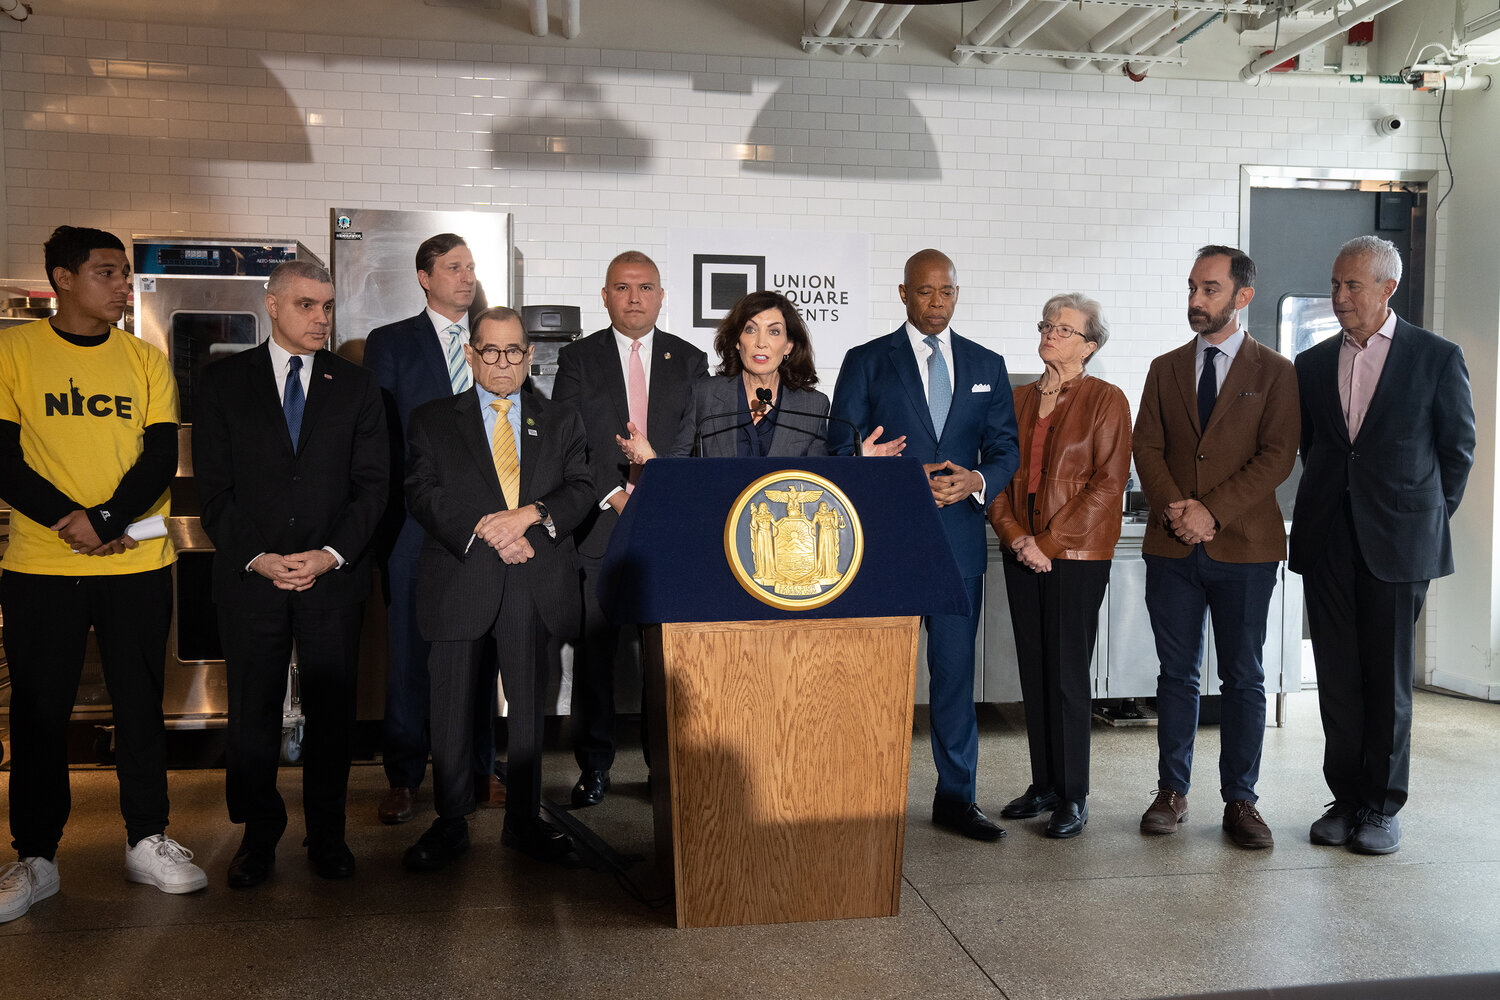 Governor Kathy Hochul takes the podium beside Mayor Eric Adams at a joint press event at Industry City in Brooklyn Monday, May 22 to push for faster work authorization for asylum seekers. The governor and mayor are calling on the Biden administration to take executive action to speed up the waiting period for asylum seekers to work legally.